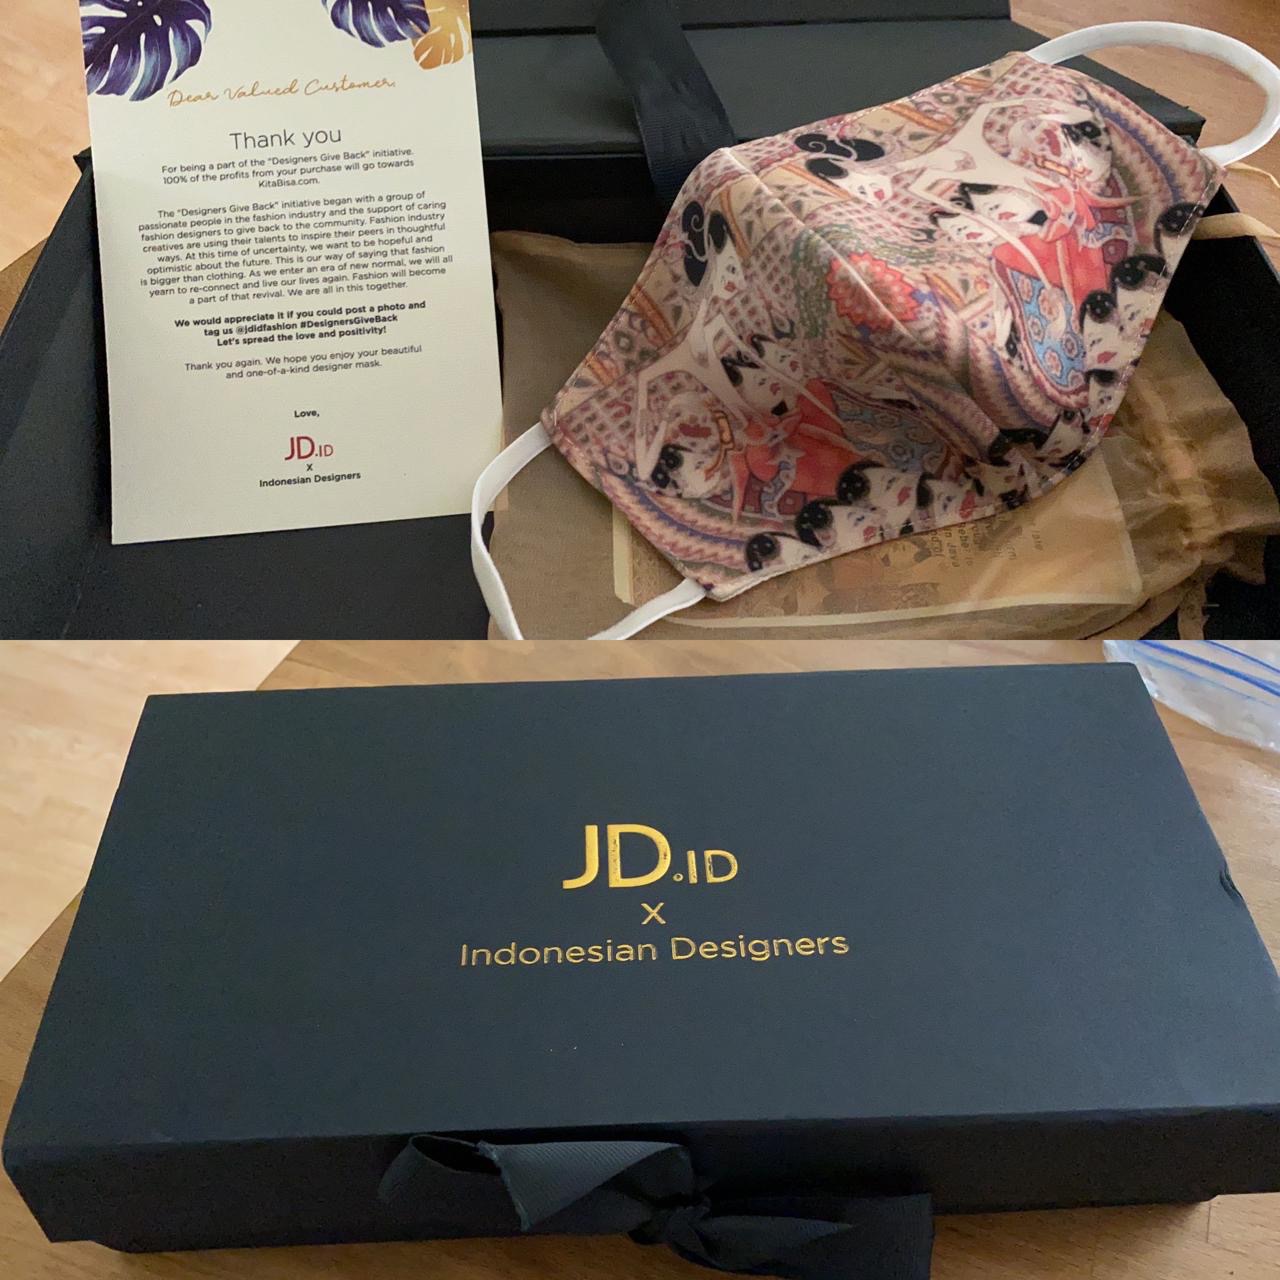 JD.ID has collected more than 100 special editions of fashion products